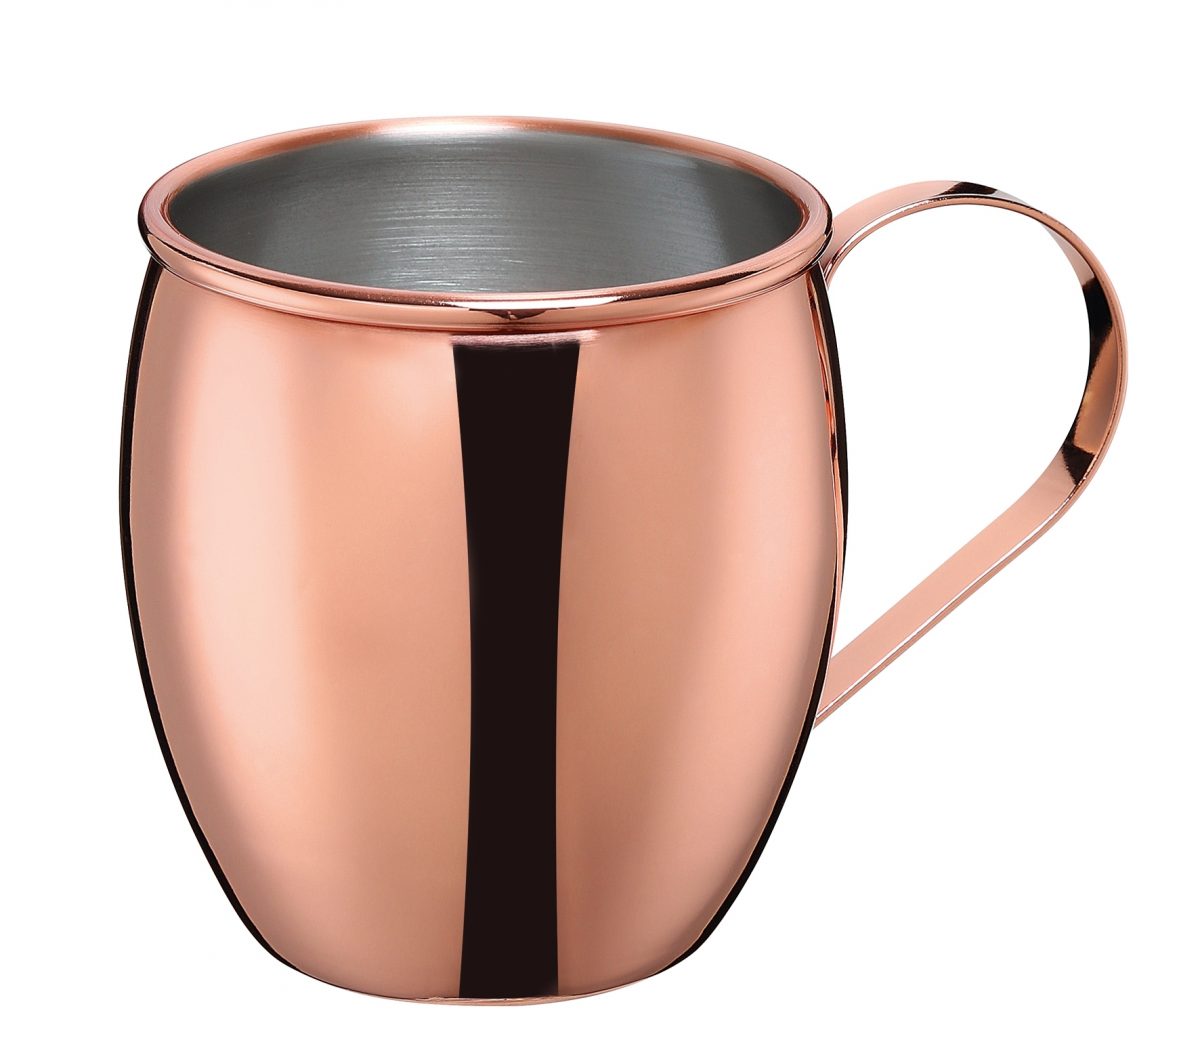 Cilio Becher MOSCOW MULE  (4017166200409)